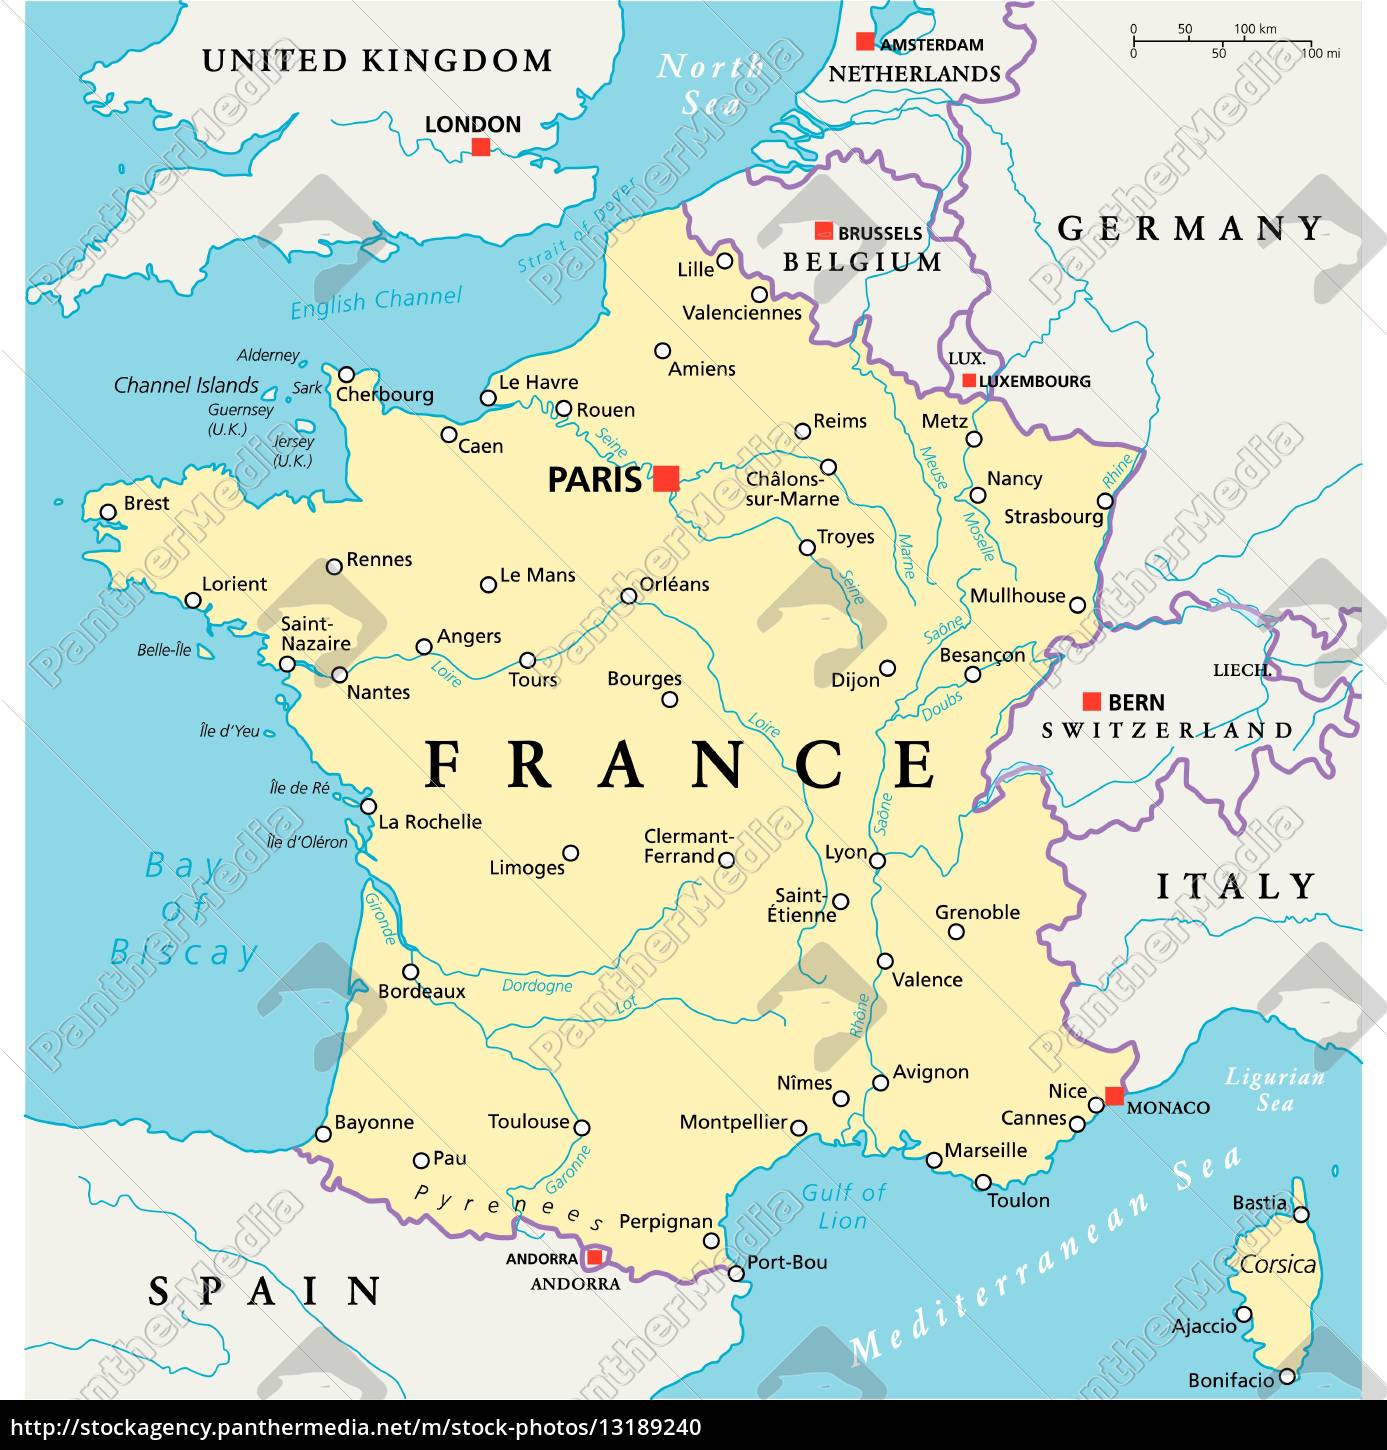 France Political Map - Royalty free photo - #13189240 | PantherMedia